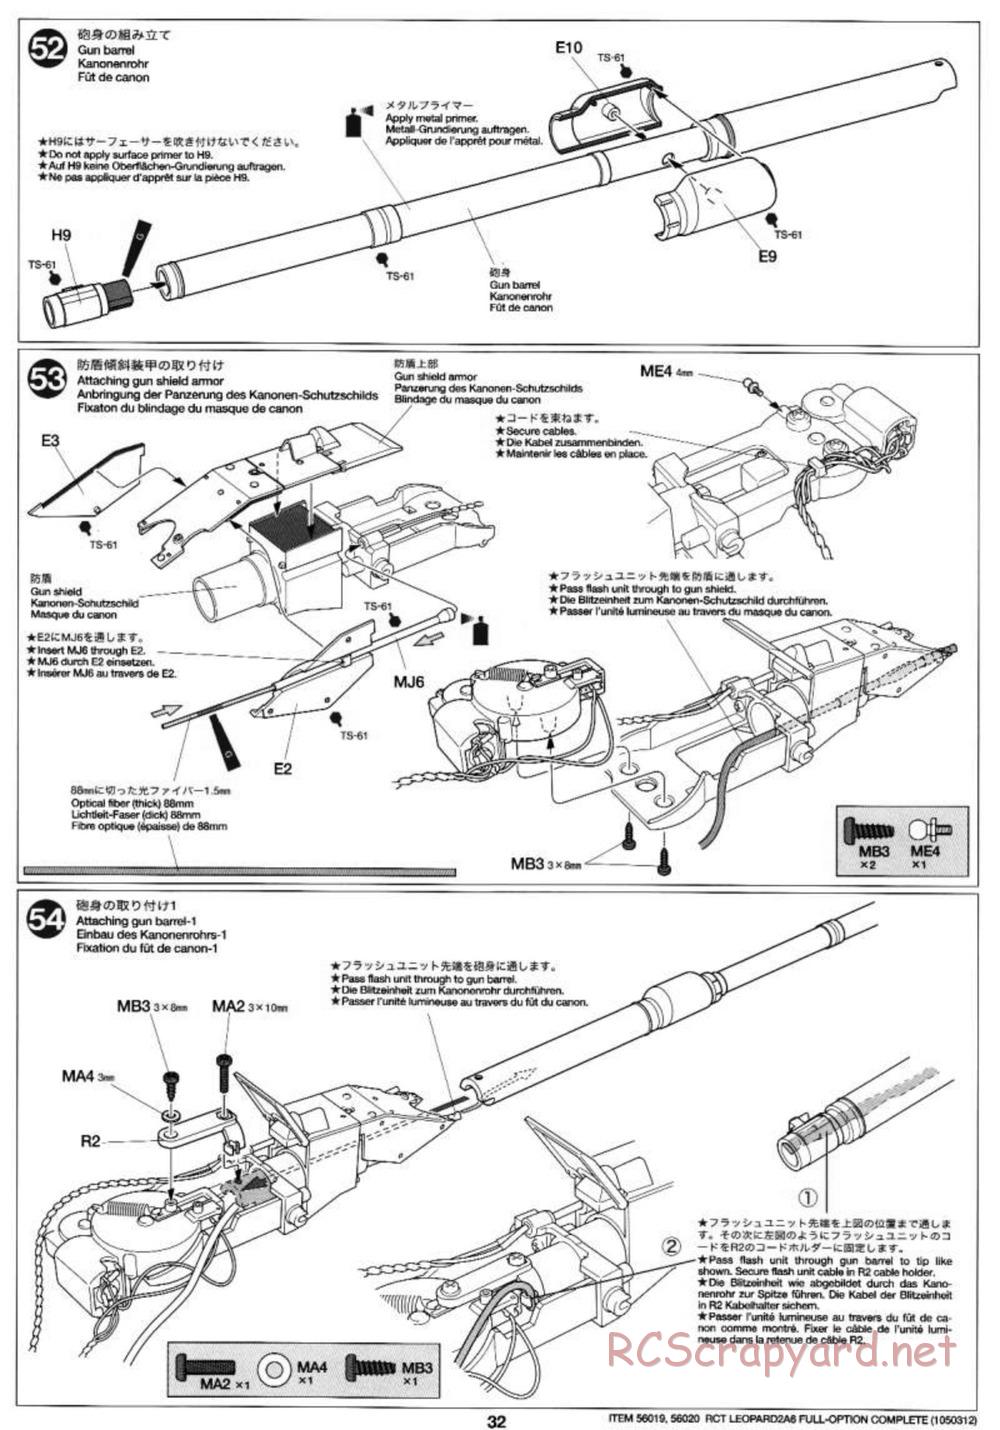 Tamiya - Leopard 2 A6 - 1/16 Scale Chassis - Manual - Page 32